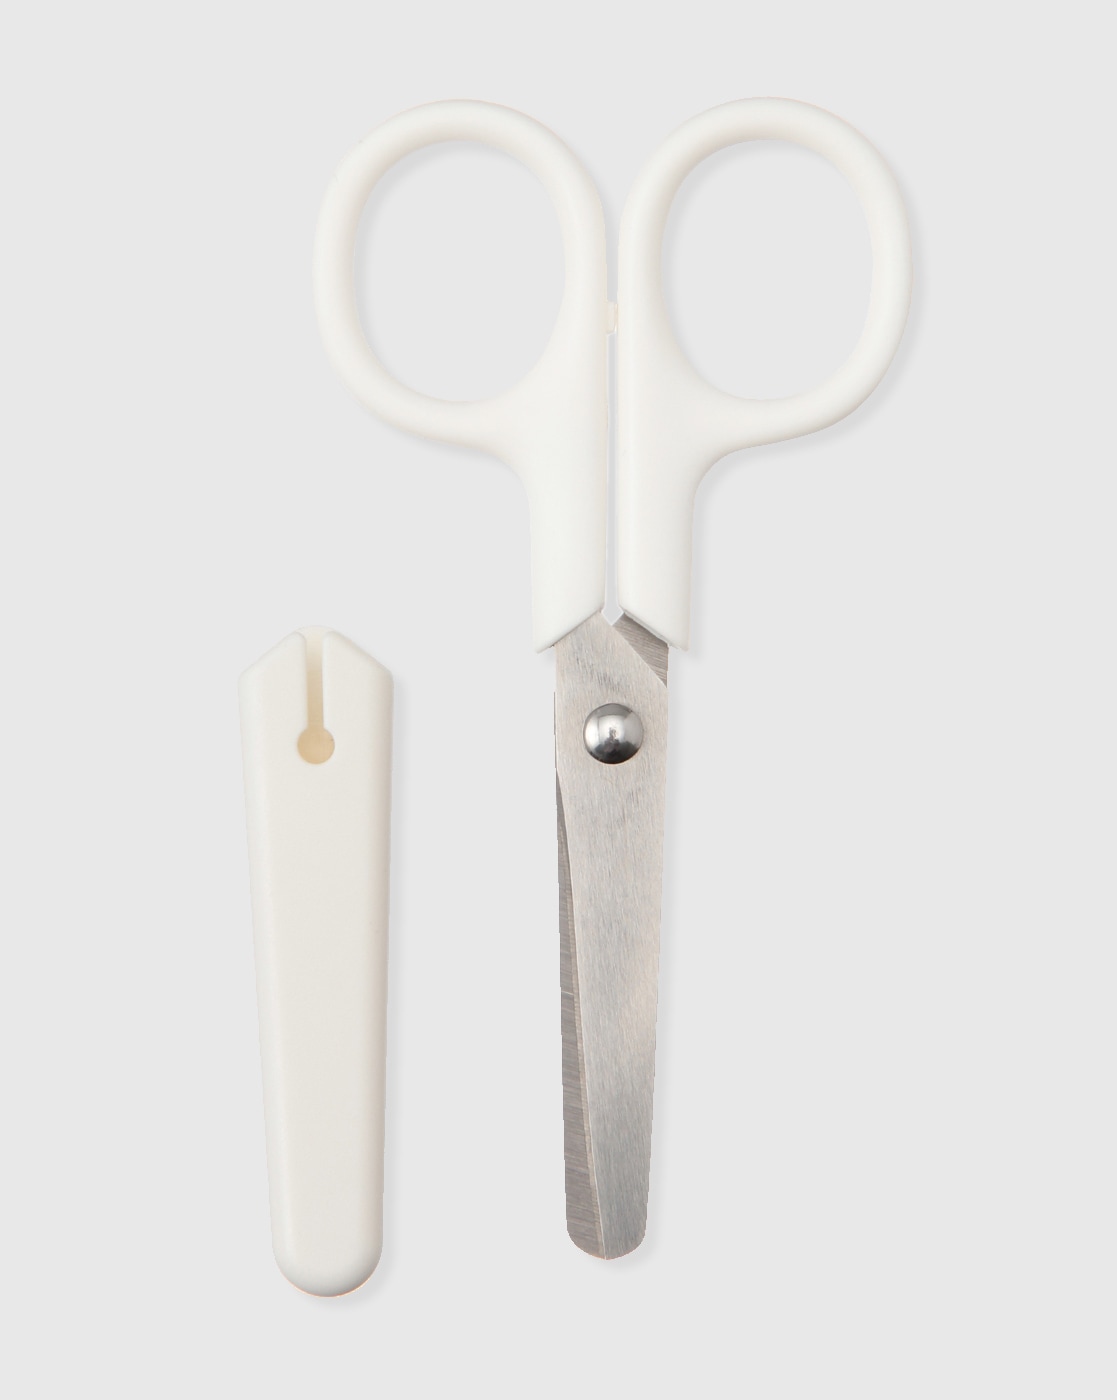 MUJI Stainless Steel Scissors Clear About 15.5 cm